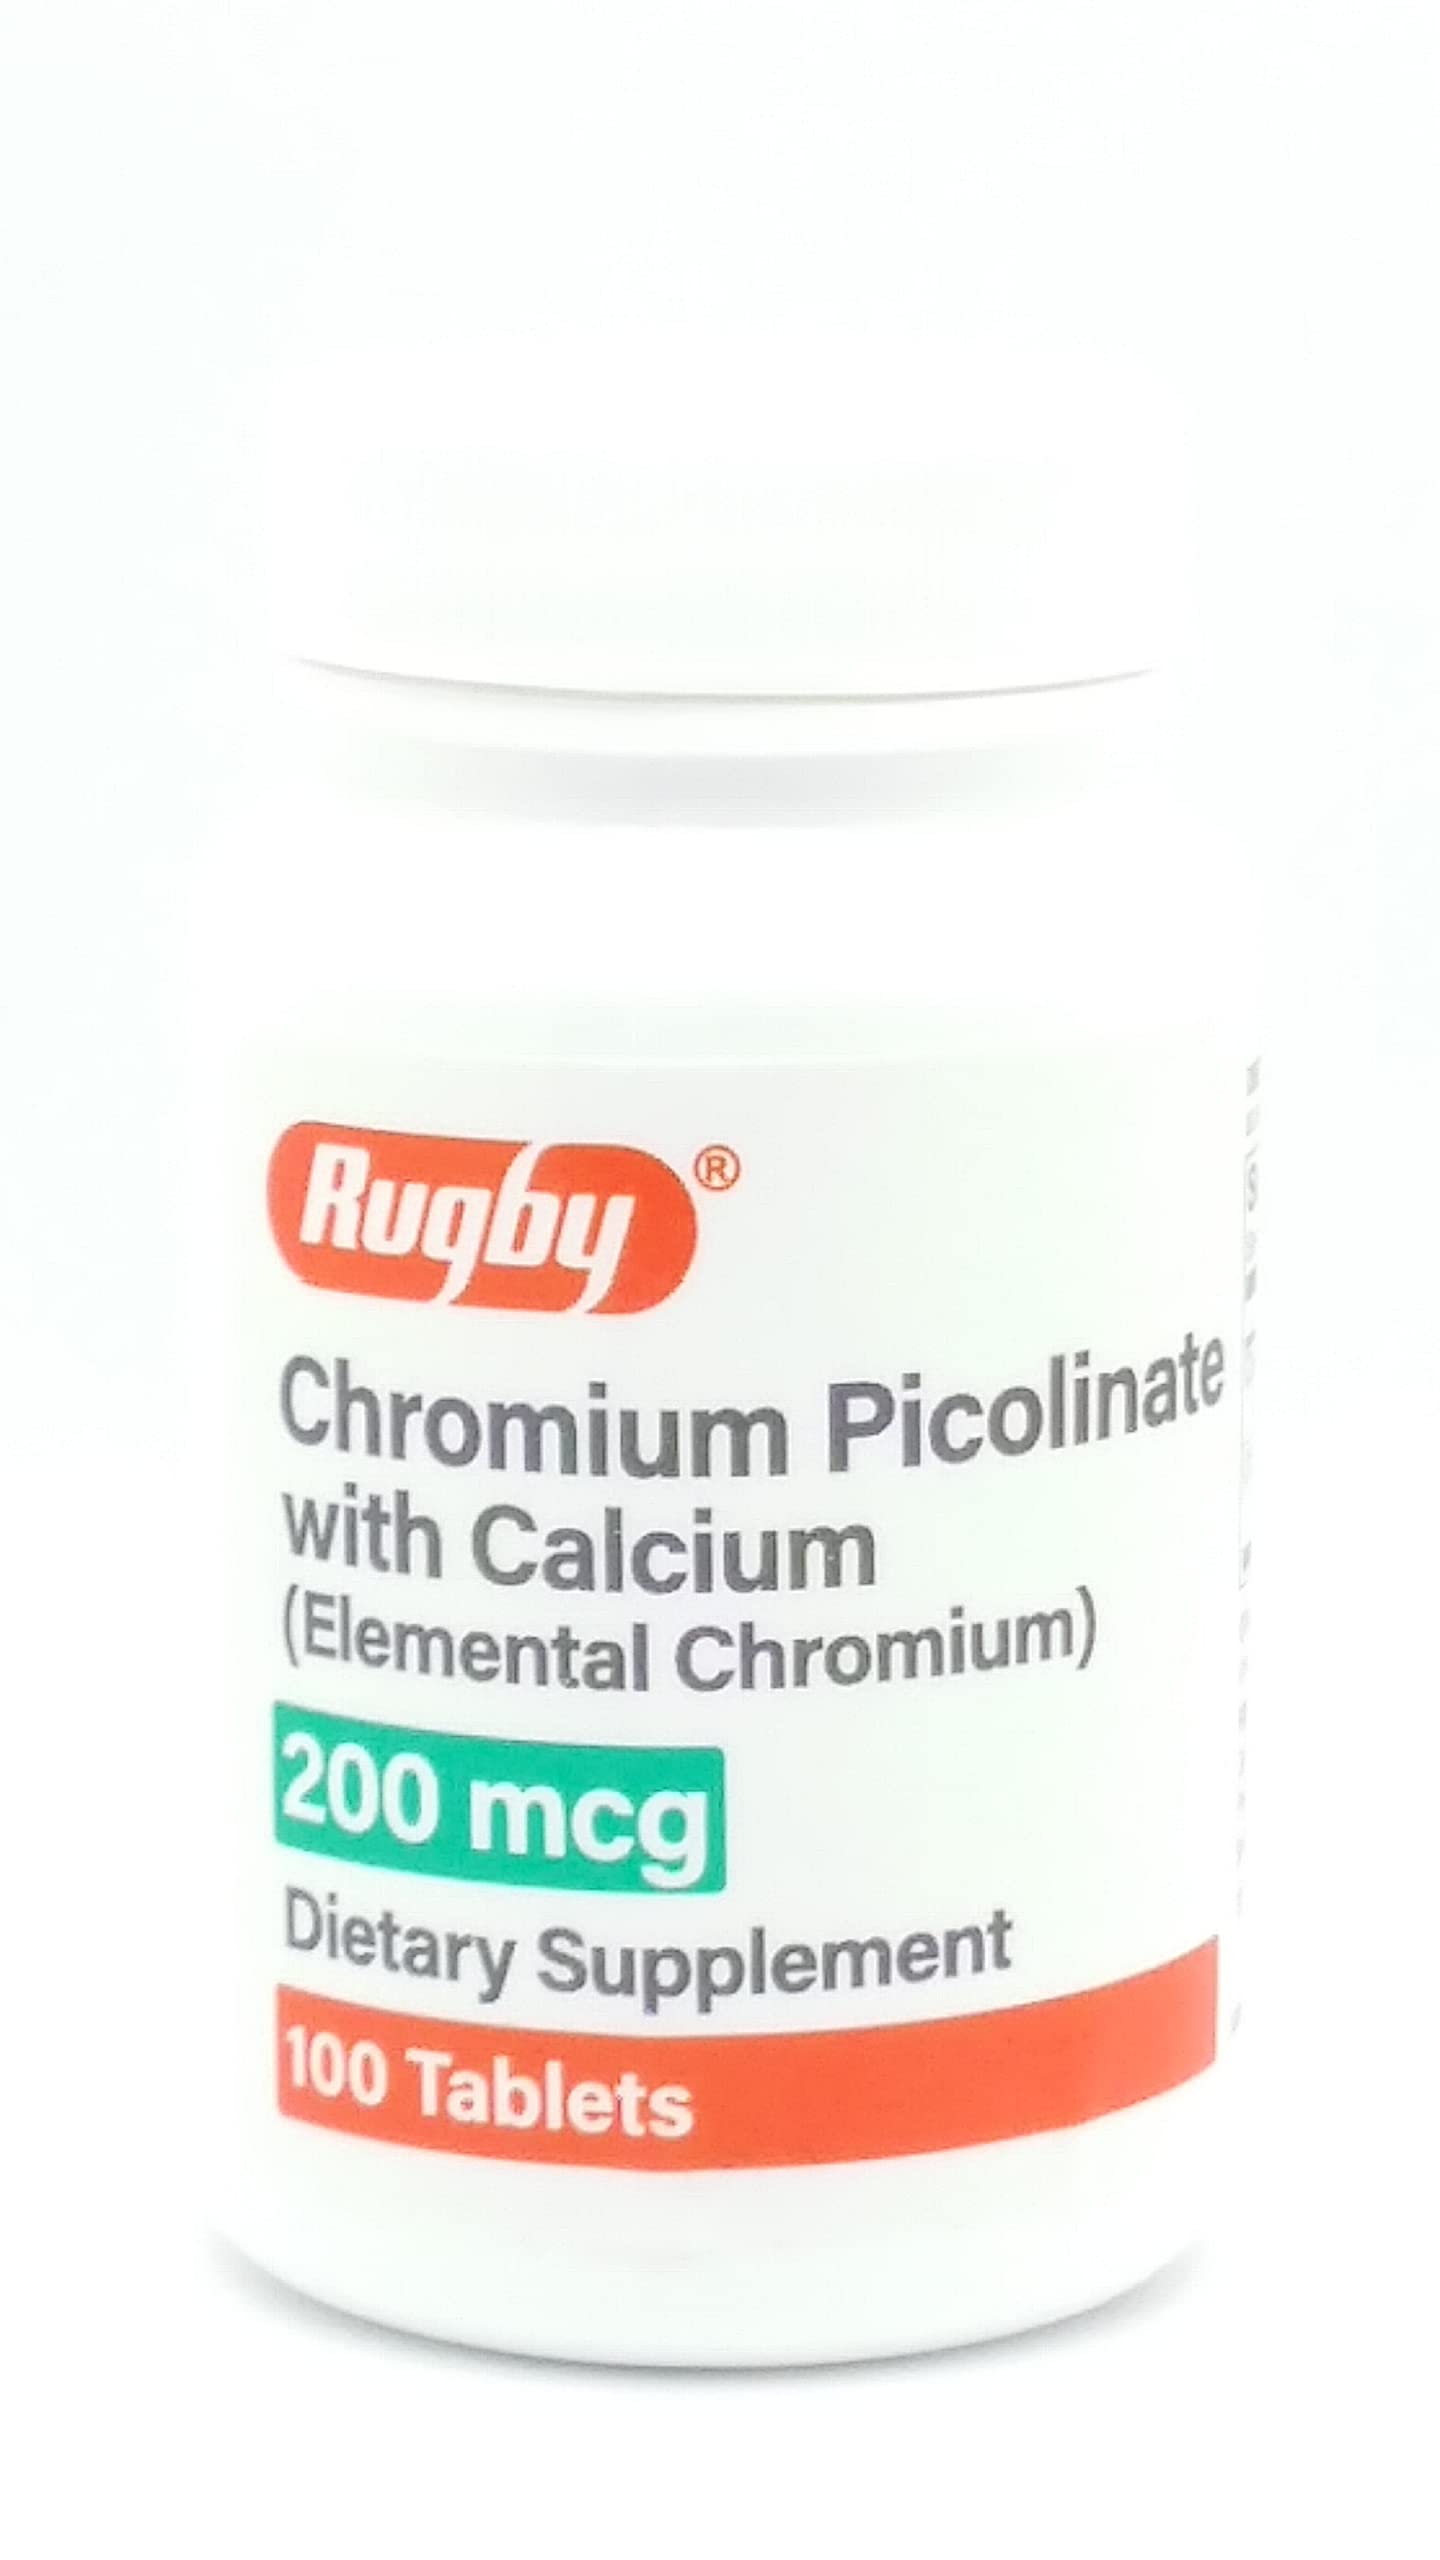 Rugby Laboratories Chromium Picolinate with Calcium (Elemental Chromium) 200 mcg Dietary Supplement Promotes Fat Protein & Sugar Metabolism 100 Tablets (Pack of 1)